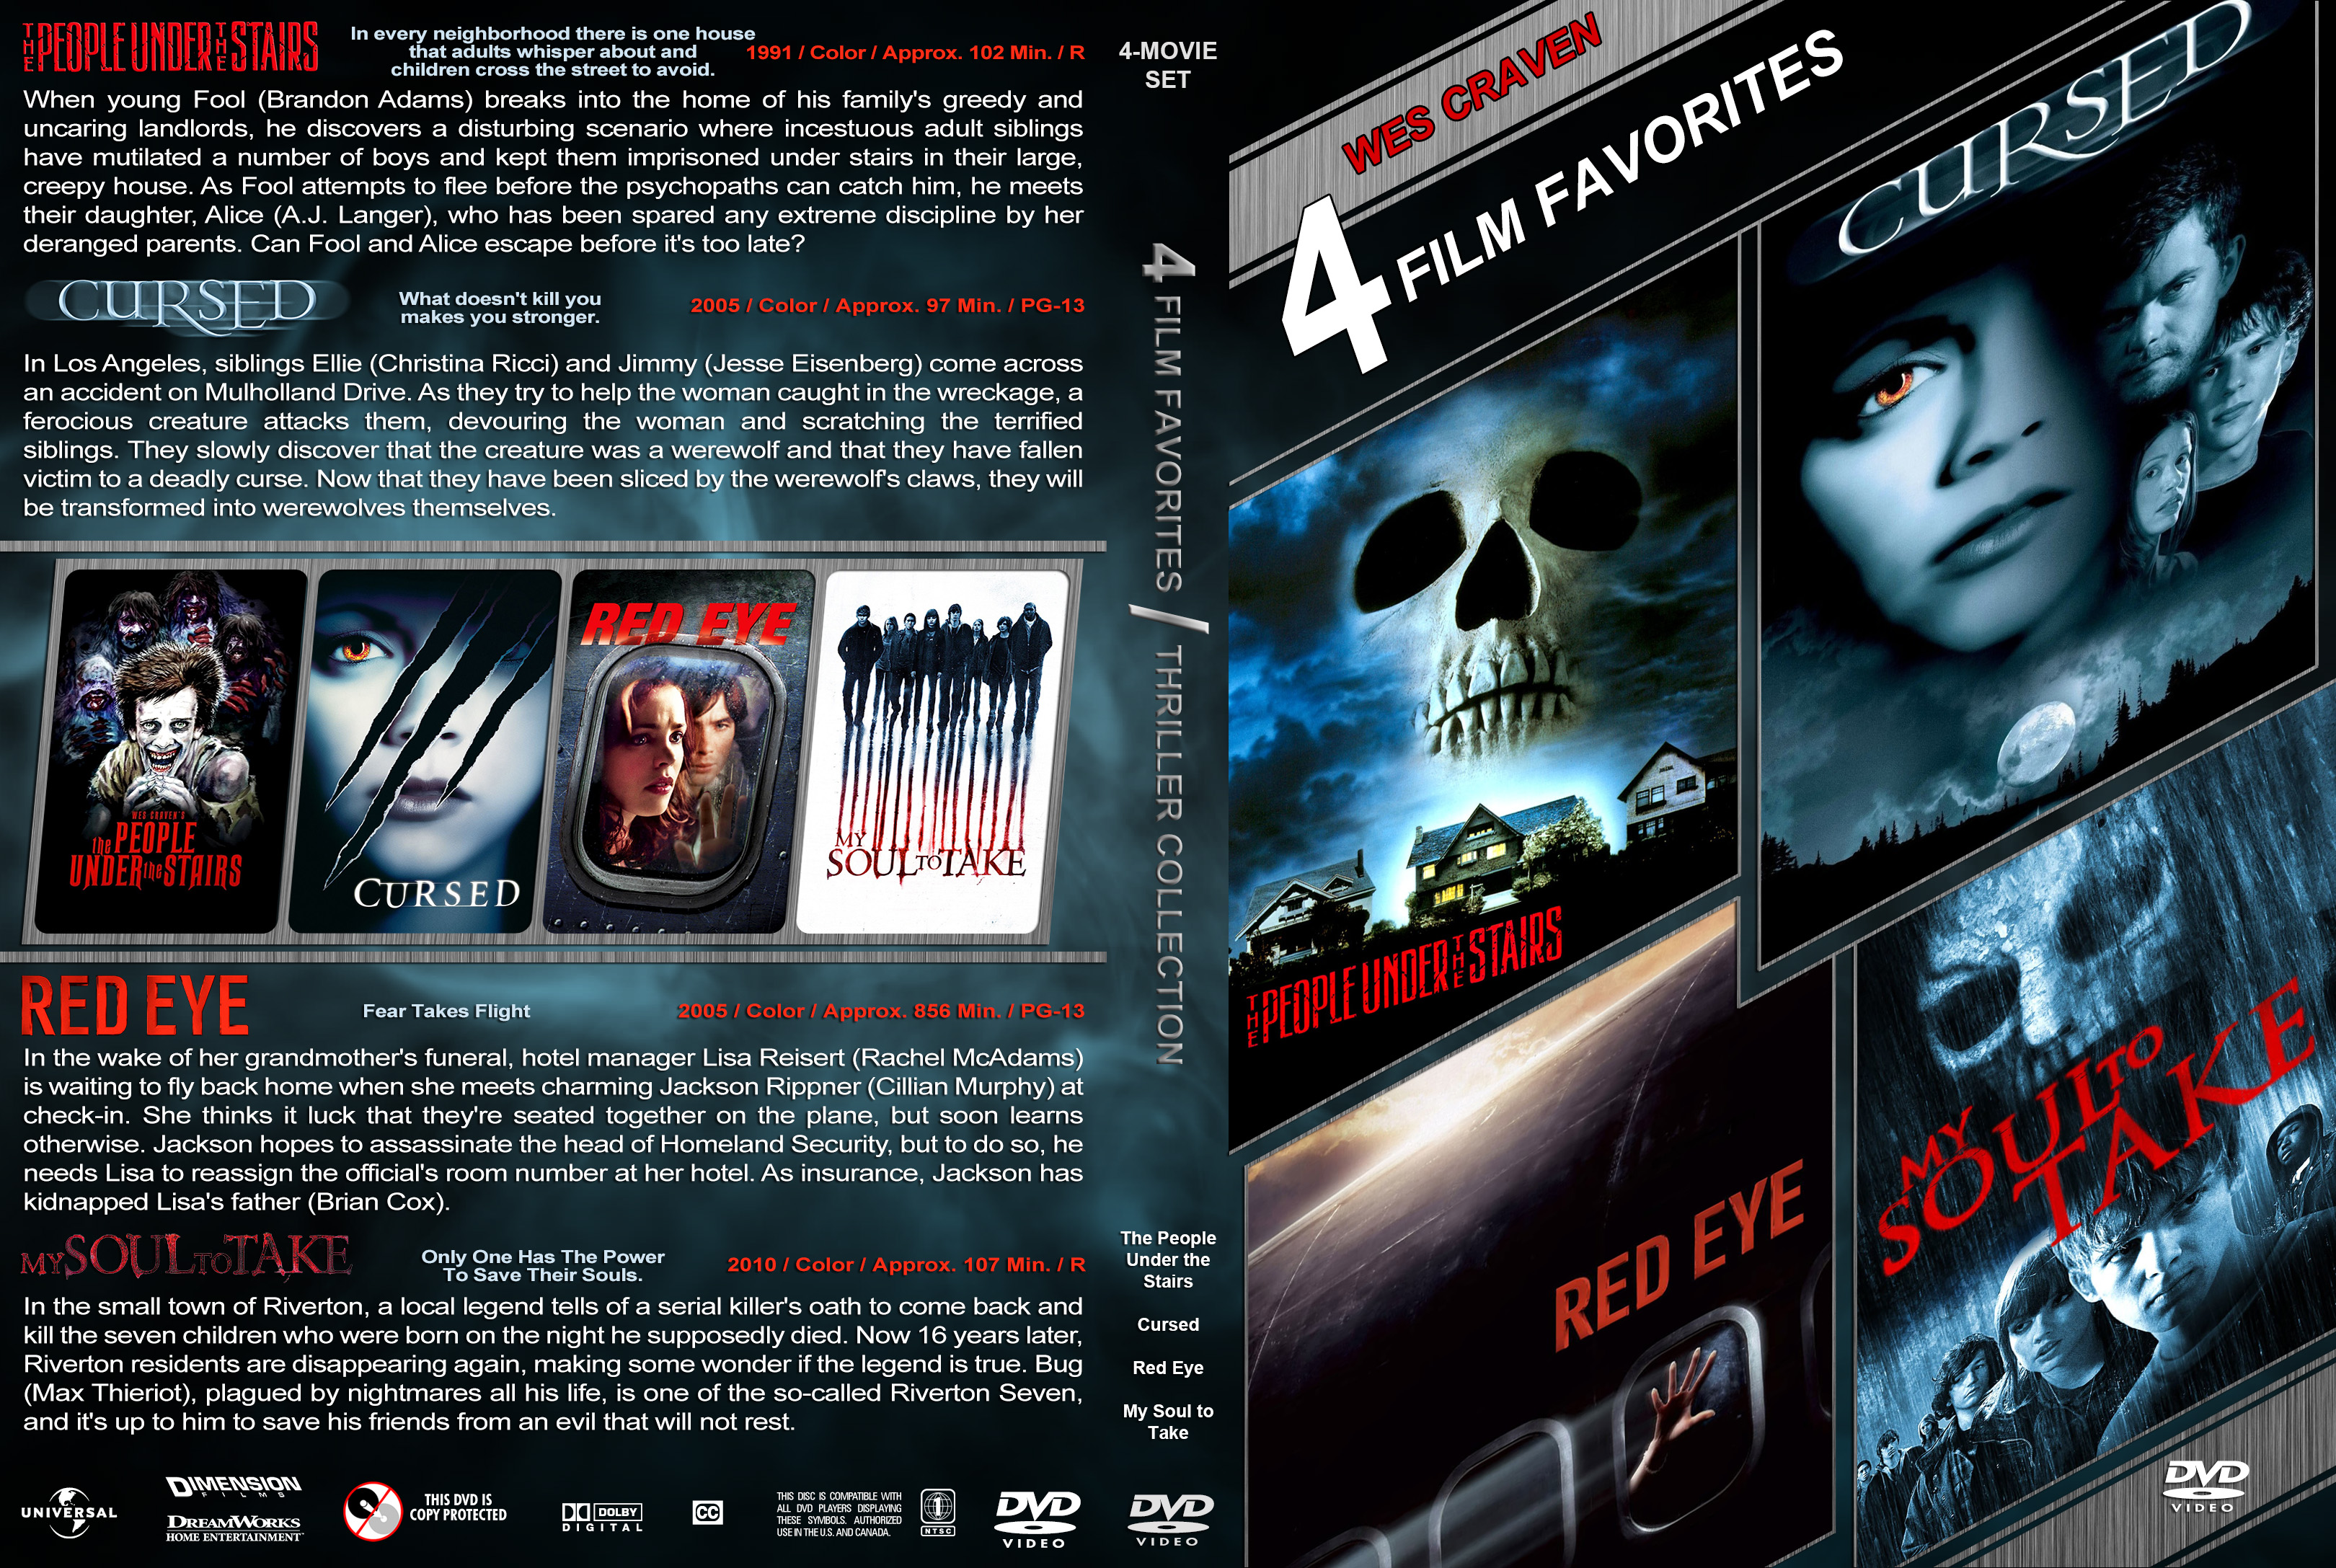 Wes Craven 4-Film Collection (1991-2010) R1 Custom DVD Cover.